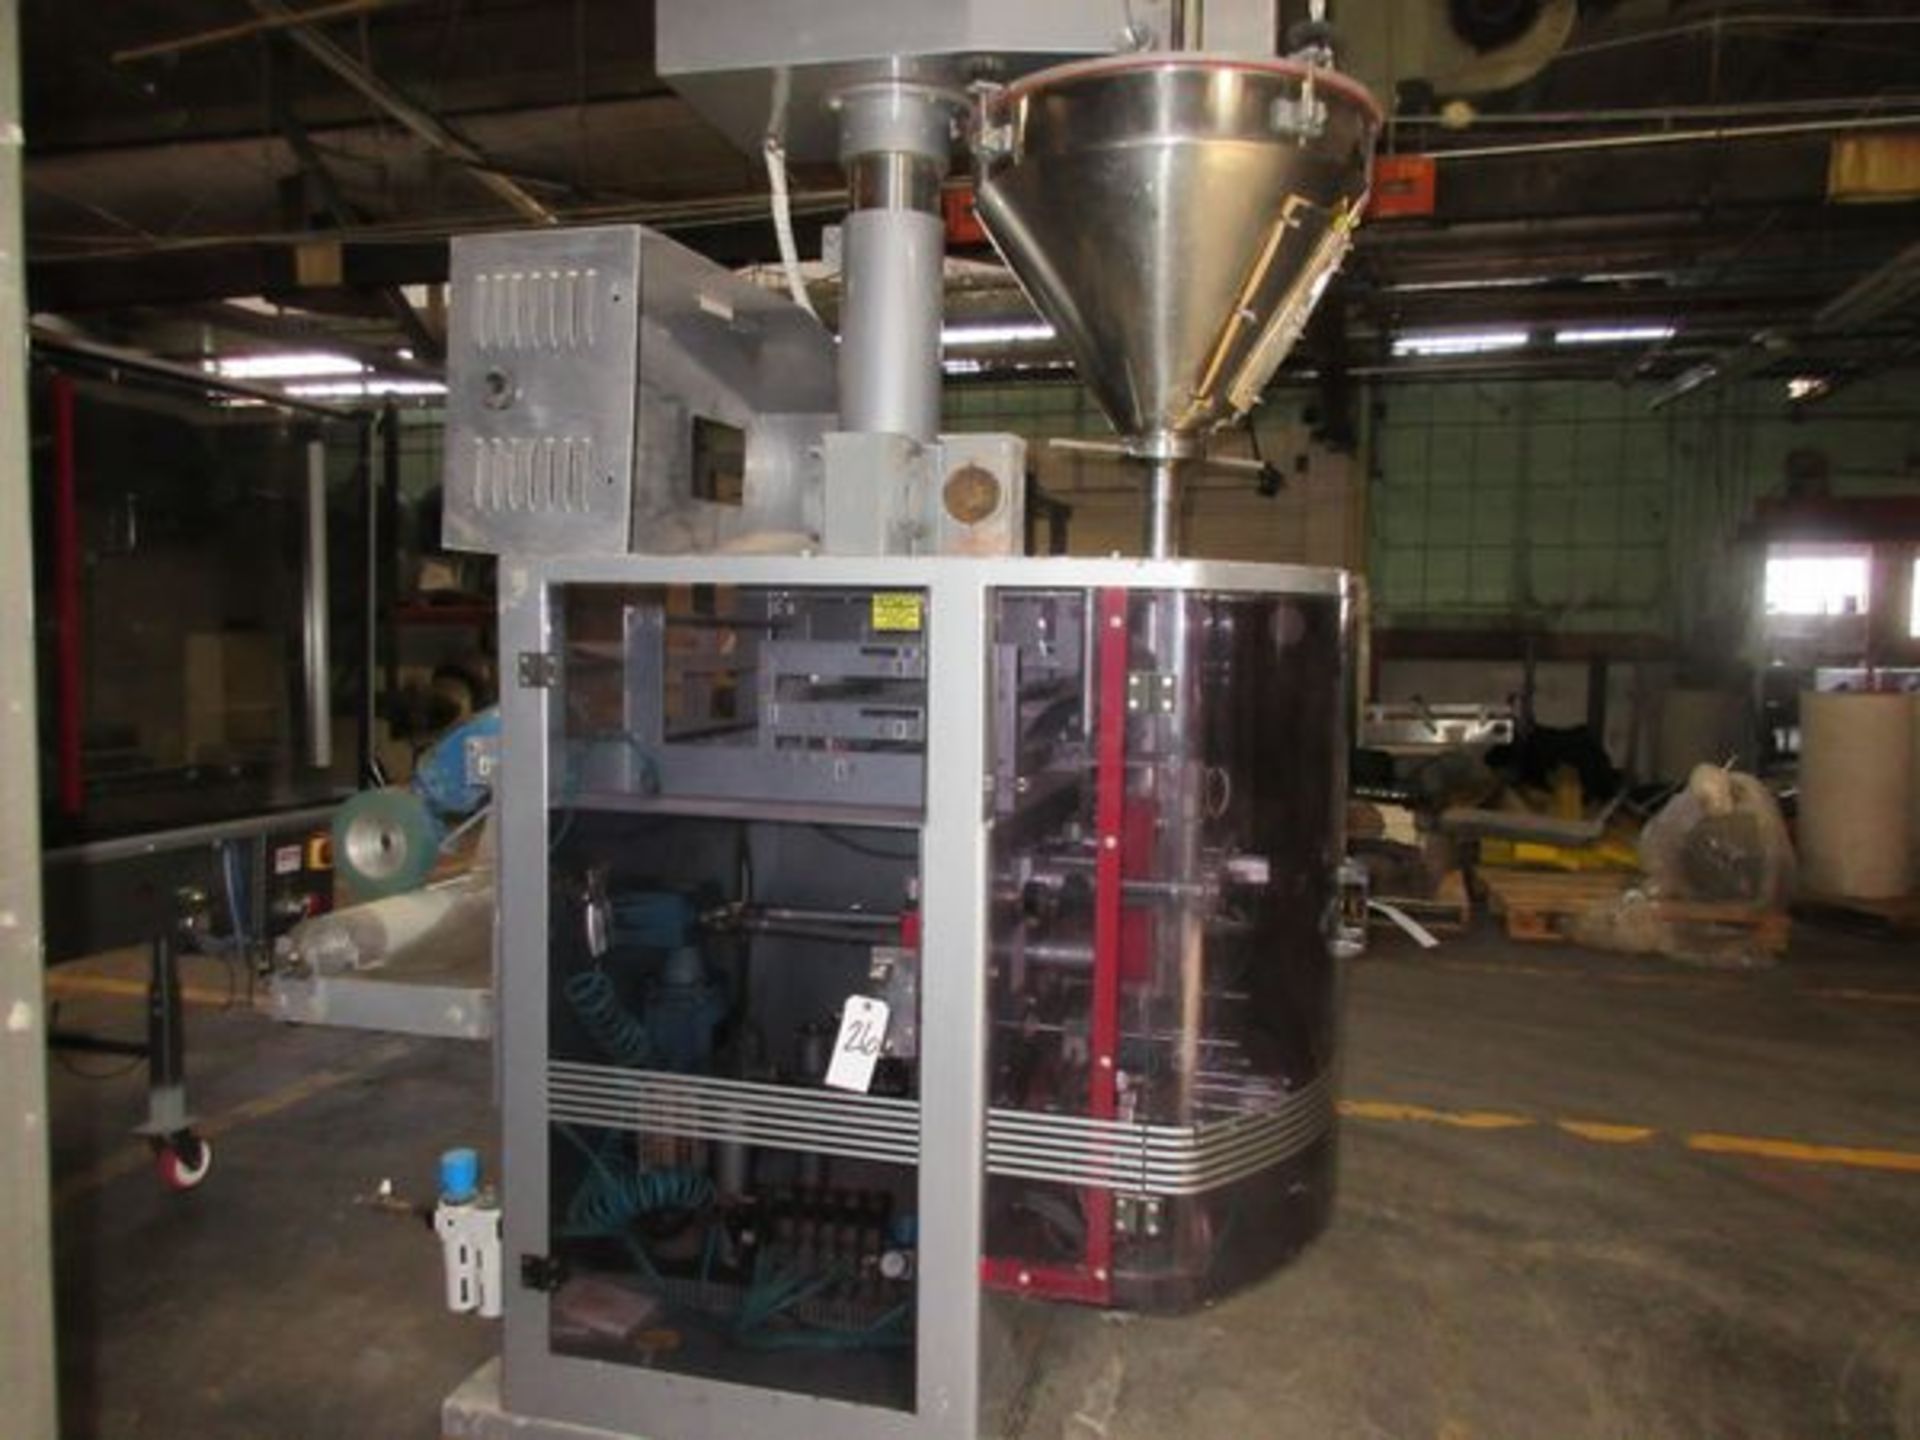 Avatar Taylor V2100 Vertical Form Fill and Seal with Powder Auger Filler 25 to 28 | Rig Fee: $200 - Image 5 of 10